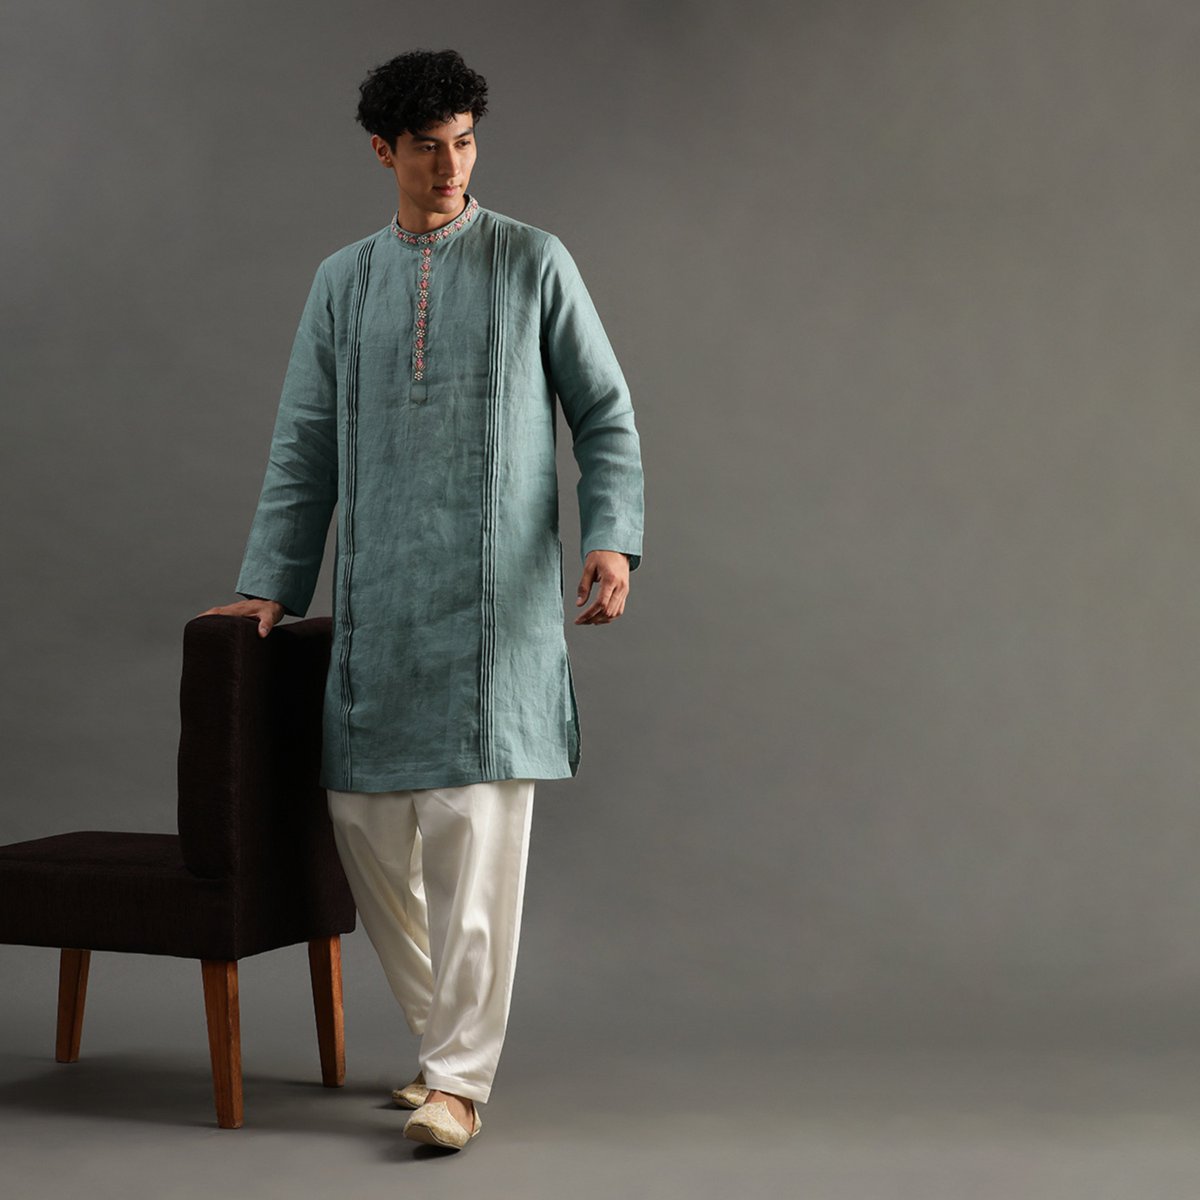 Embrace the calming allure of sage🤩
#MensEthnicWear
#TraditionalThreads
#EthnicElegance
#CulturalFashion
#HeritageStyle
#RoyalAttire
#FashionRevival
#TimelessTradition
#CulturalRoots
#EthnicChic